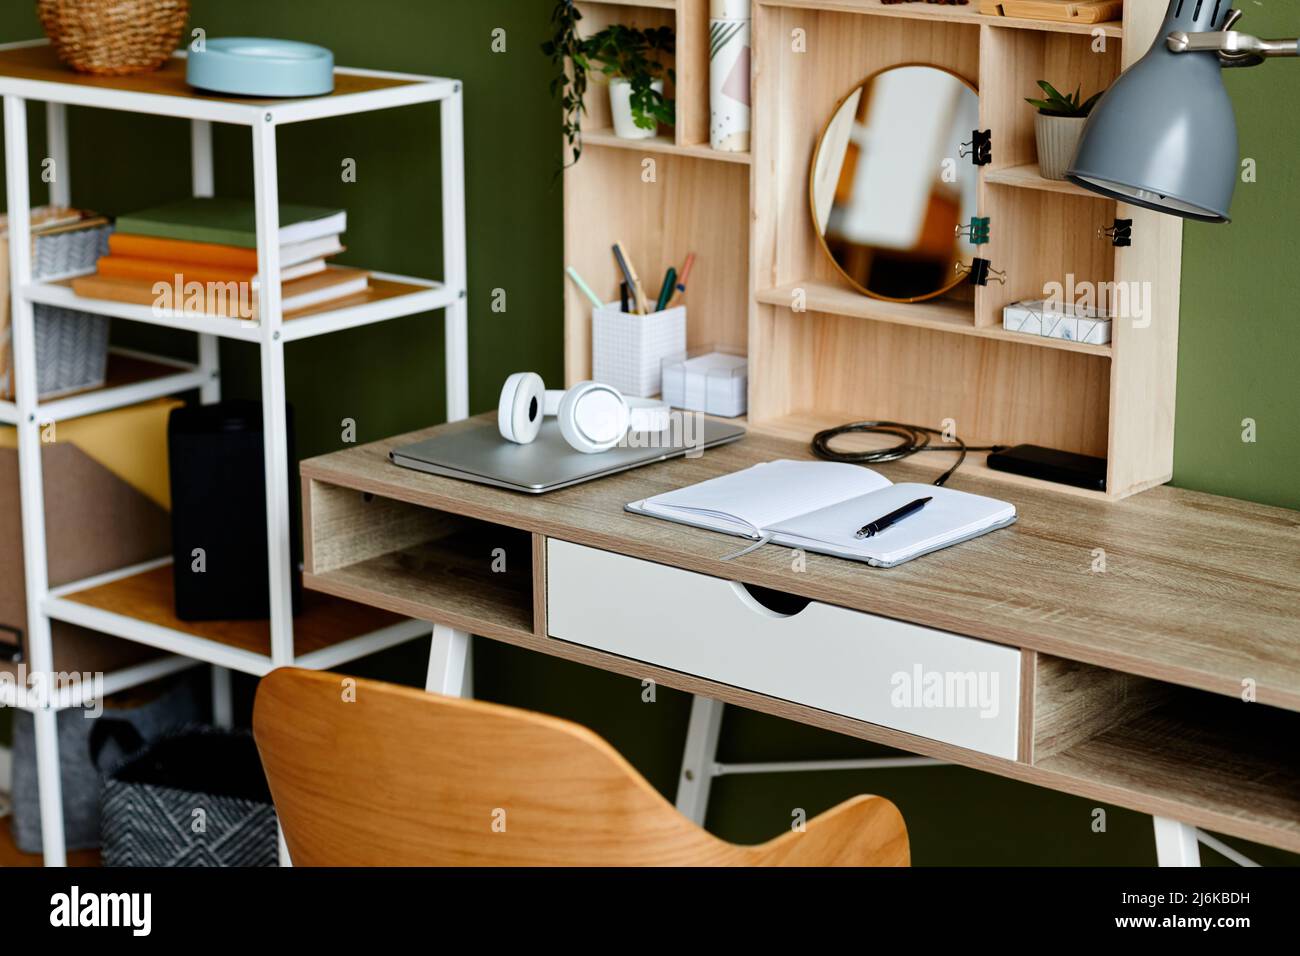 Background image of busy home office workplace with wooden table and notebook set up for studying, copy space Stock Photo